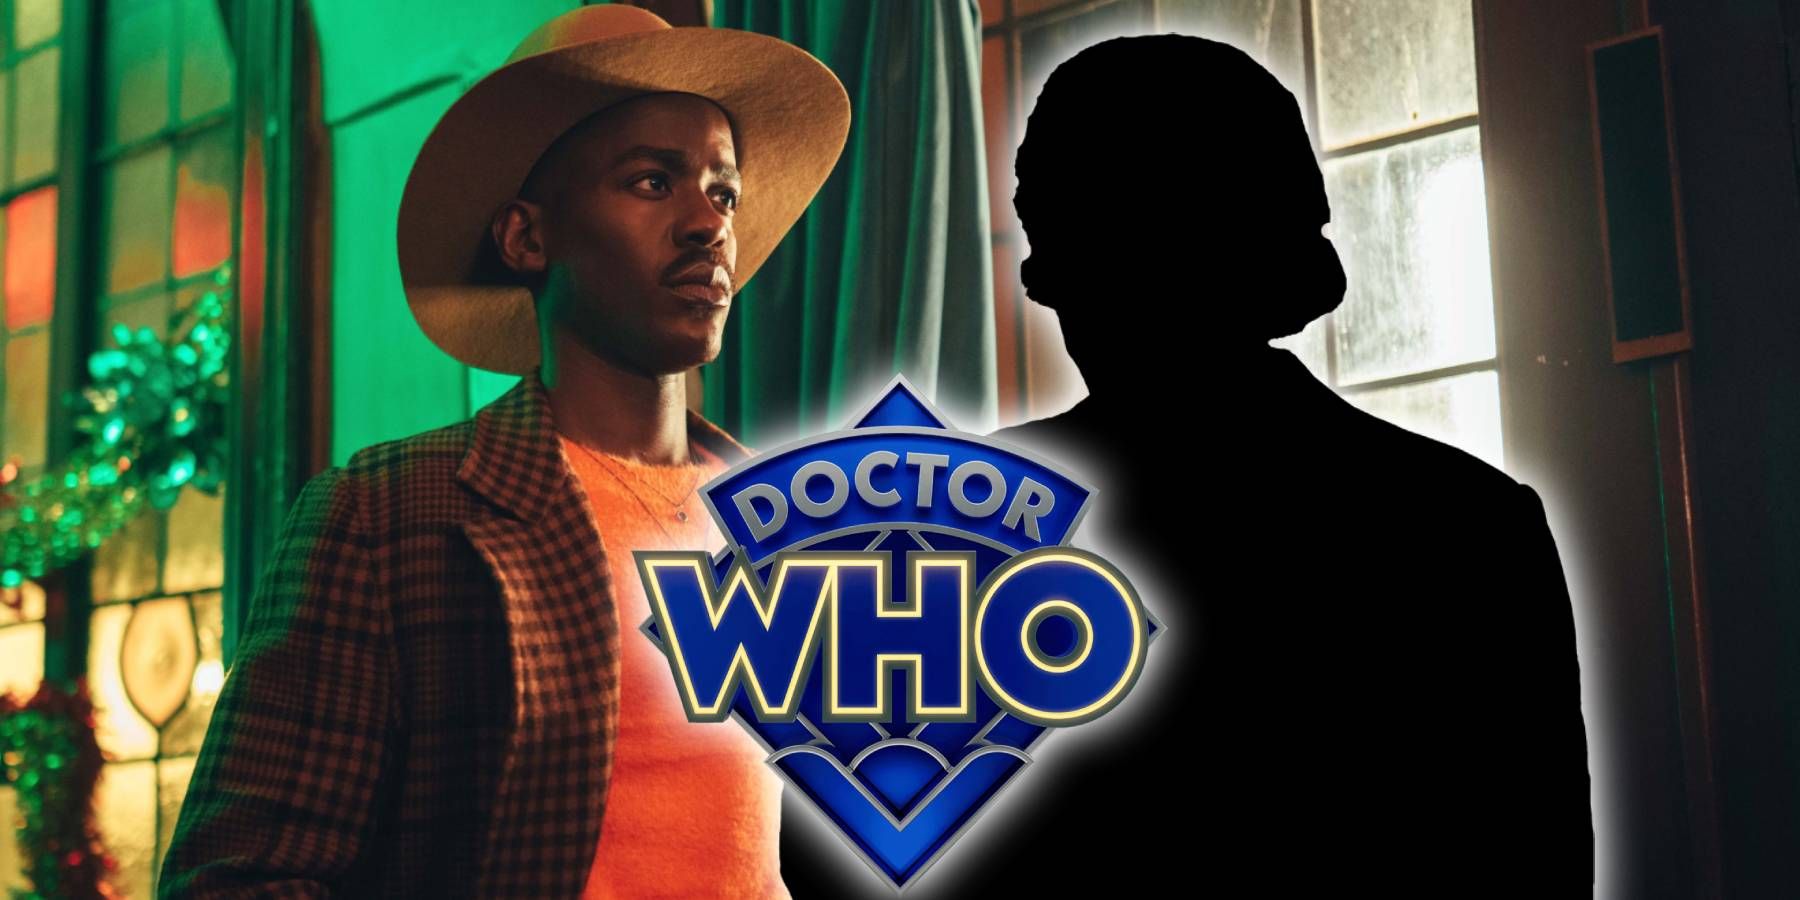 Ncuti Gatwa as the Fifteenth (15th) Doctor in Doctor Who with a silhouette